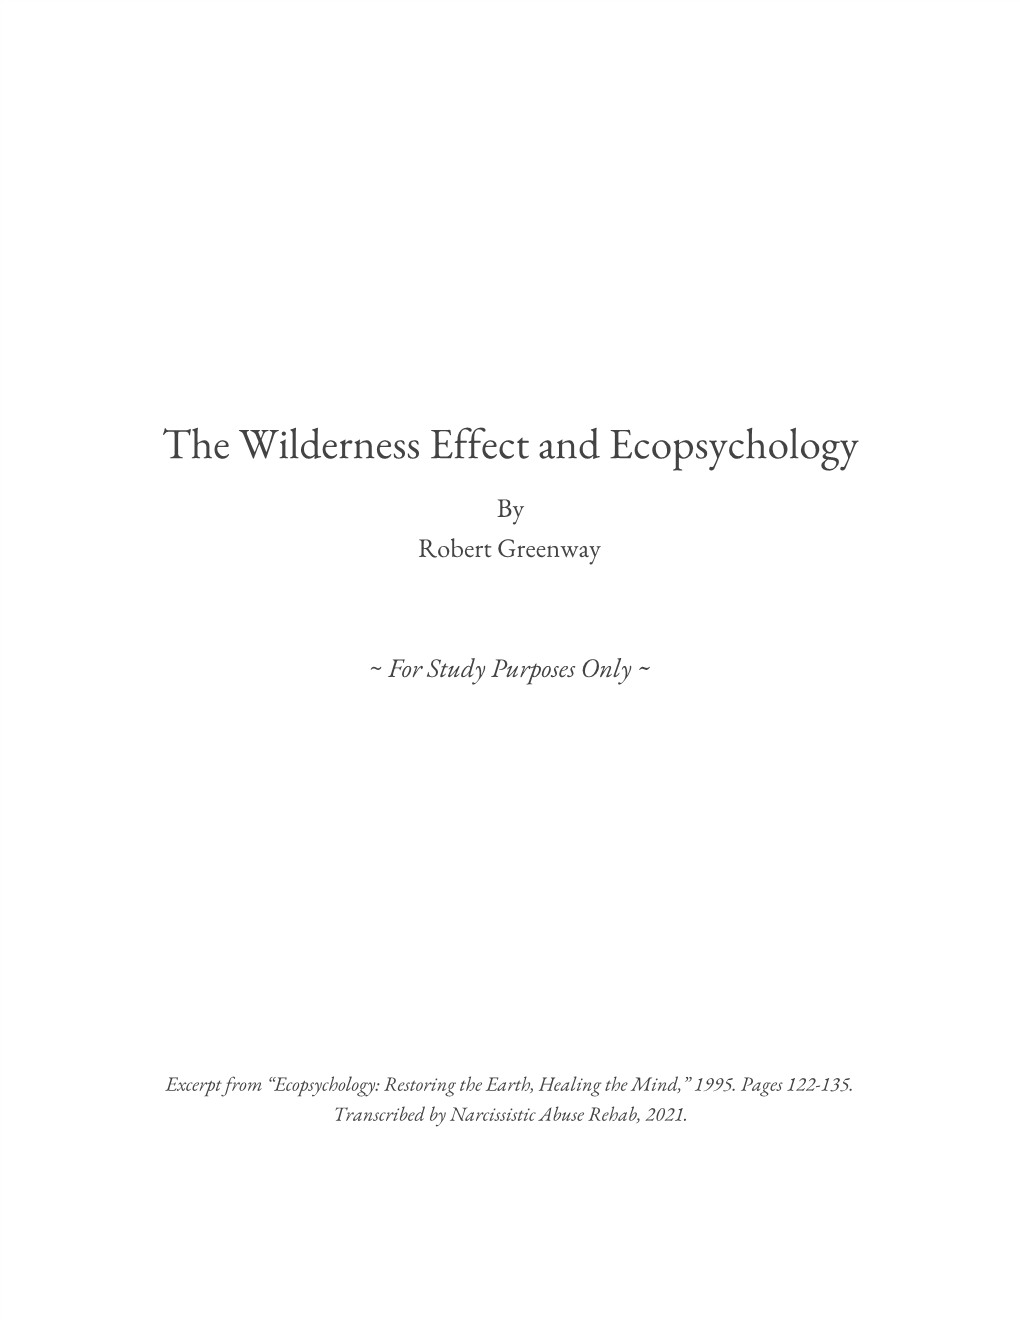 The Wilderness Effect and Ecopsychology